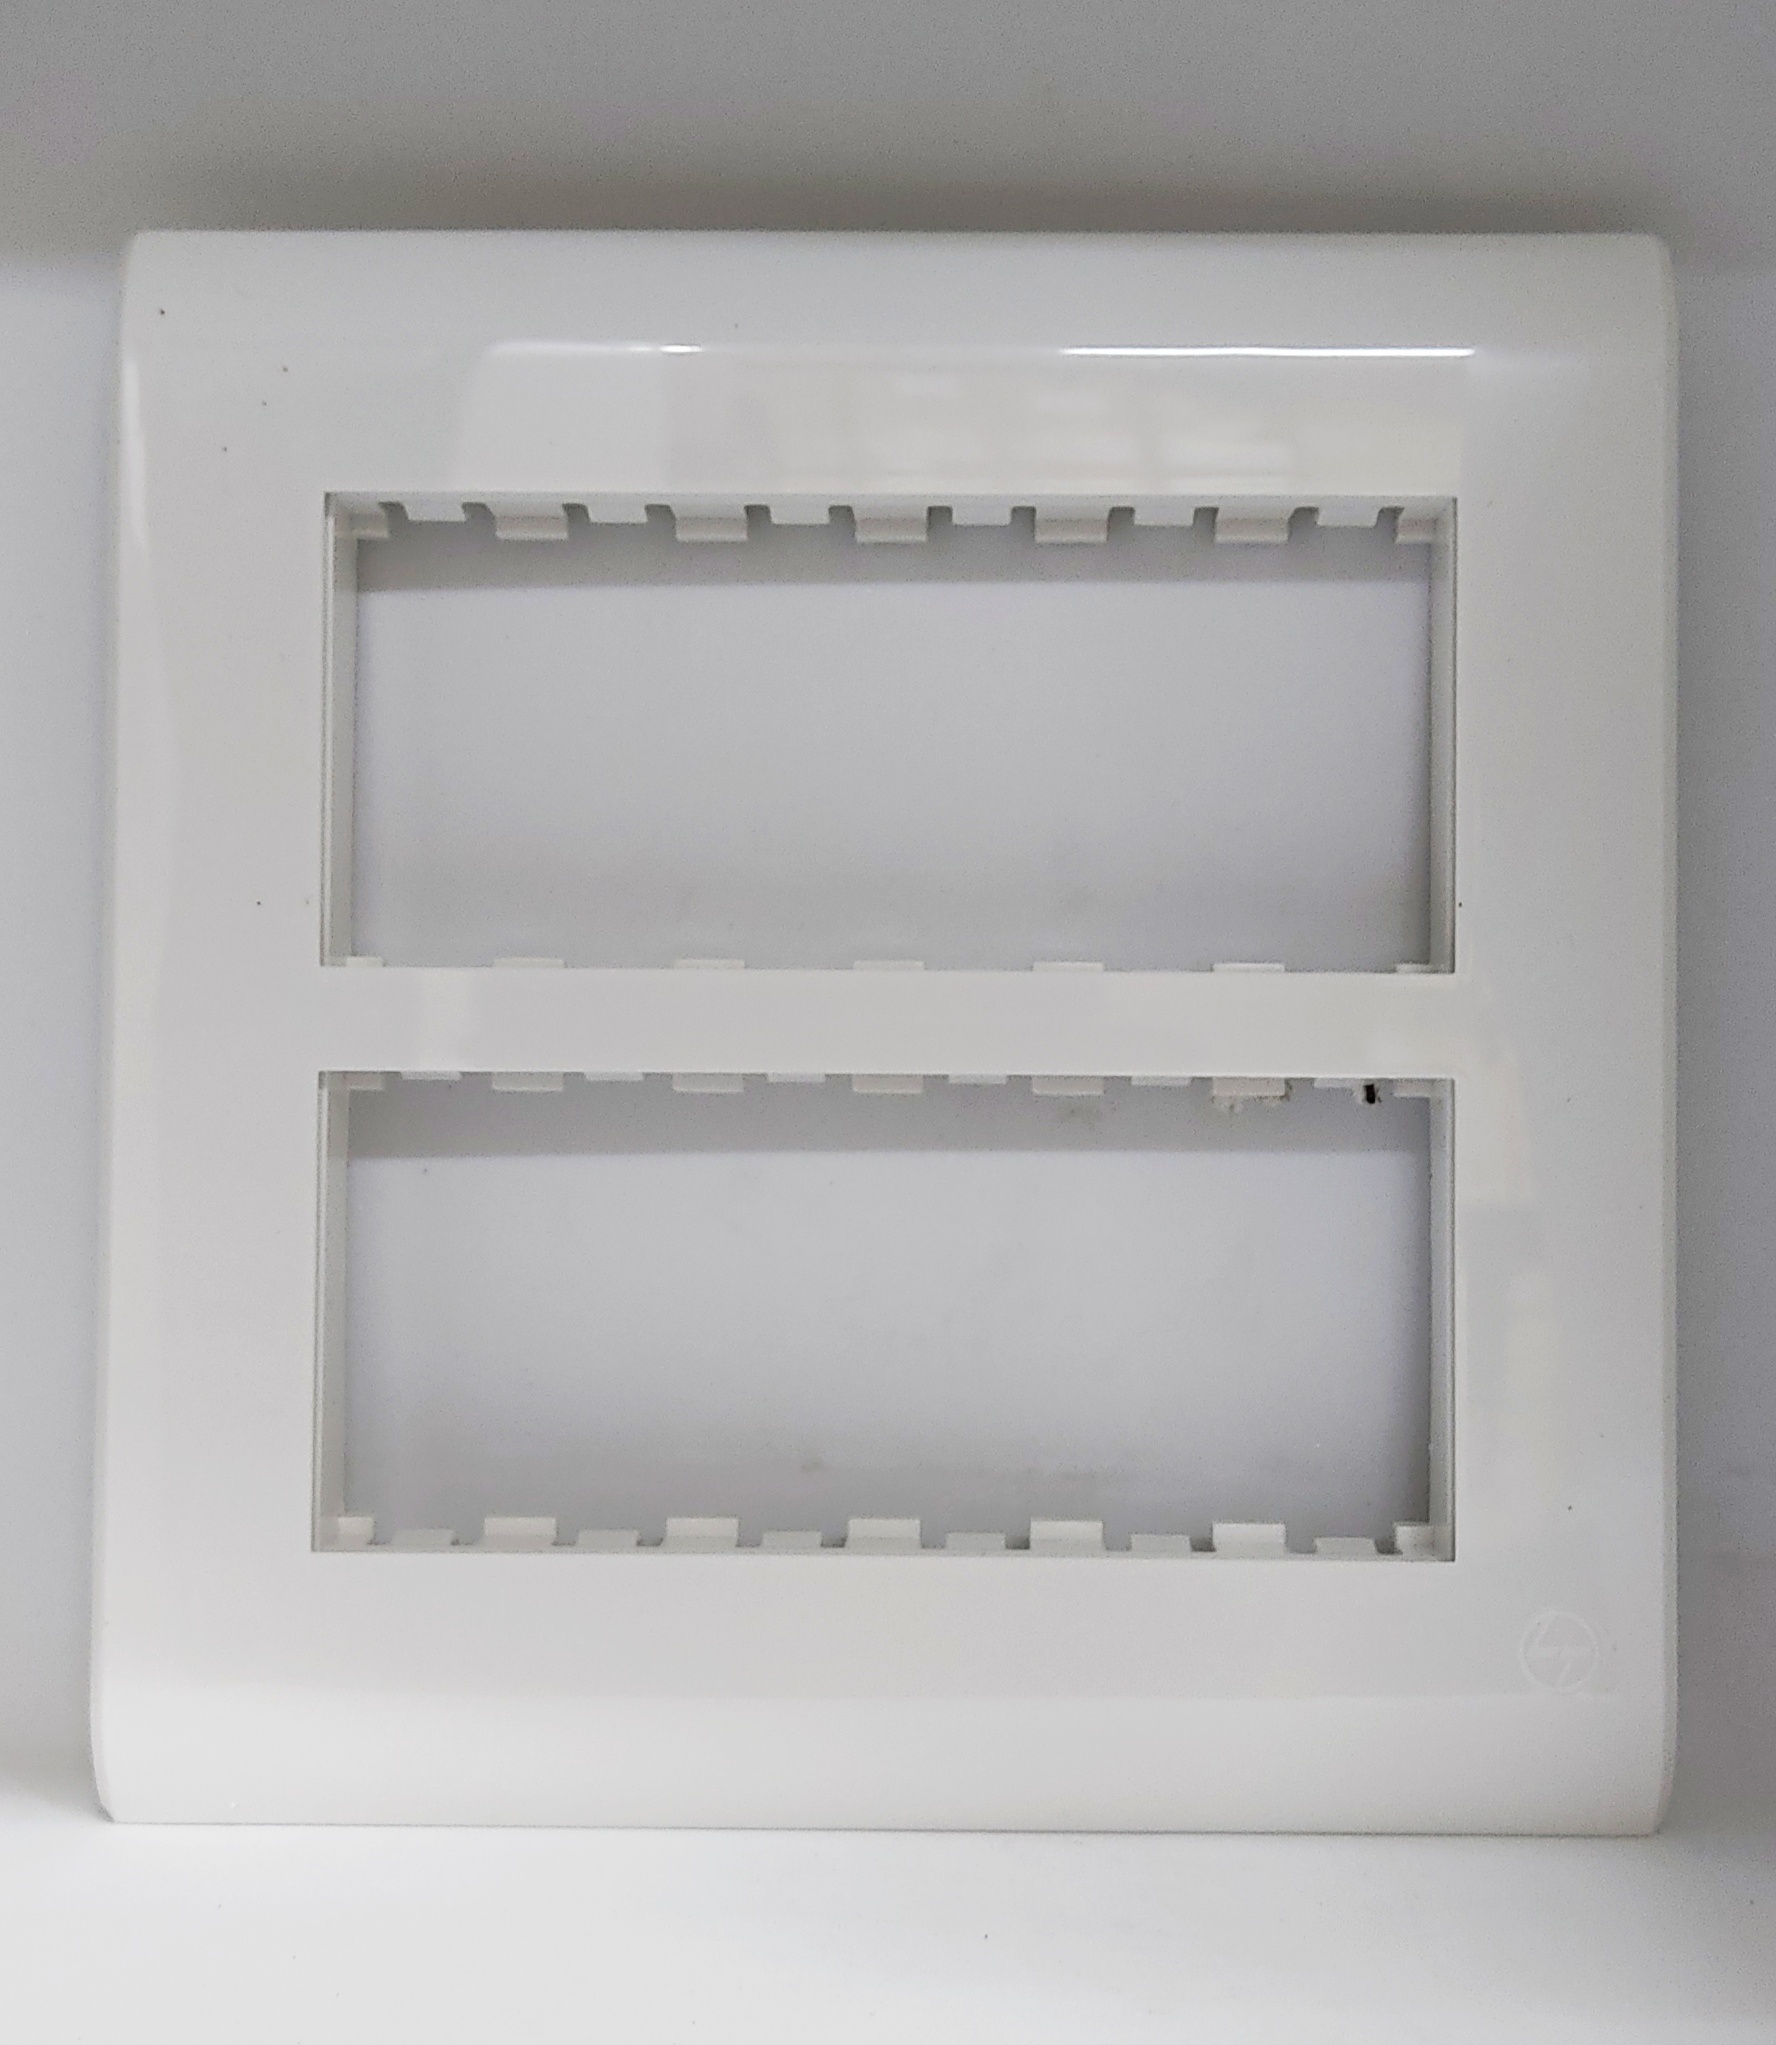 12 module, Cover Plate with Base Frame, L&T ORIS - White